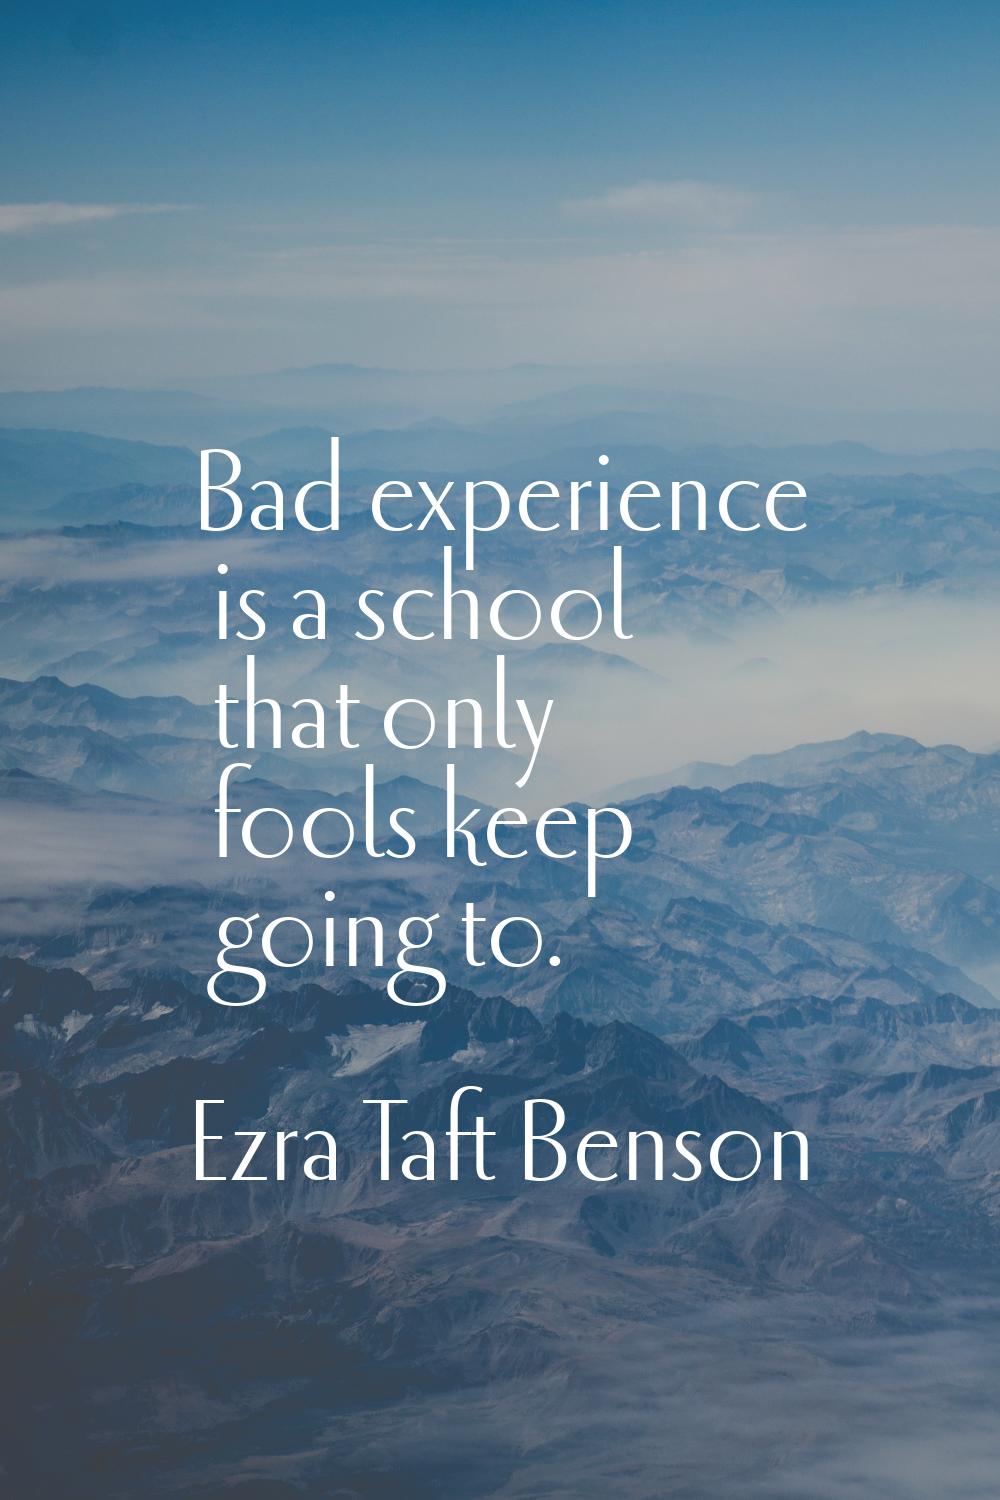 Bad experience is a school that only fools keep going to.